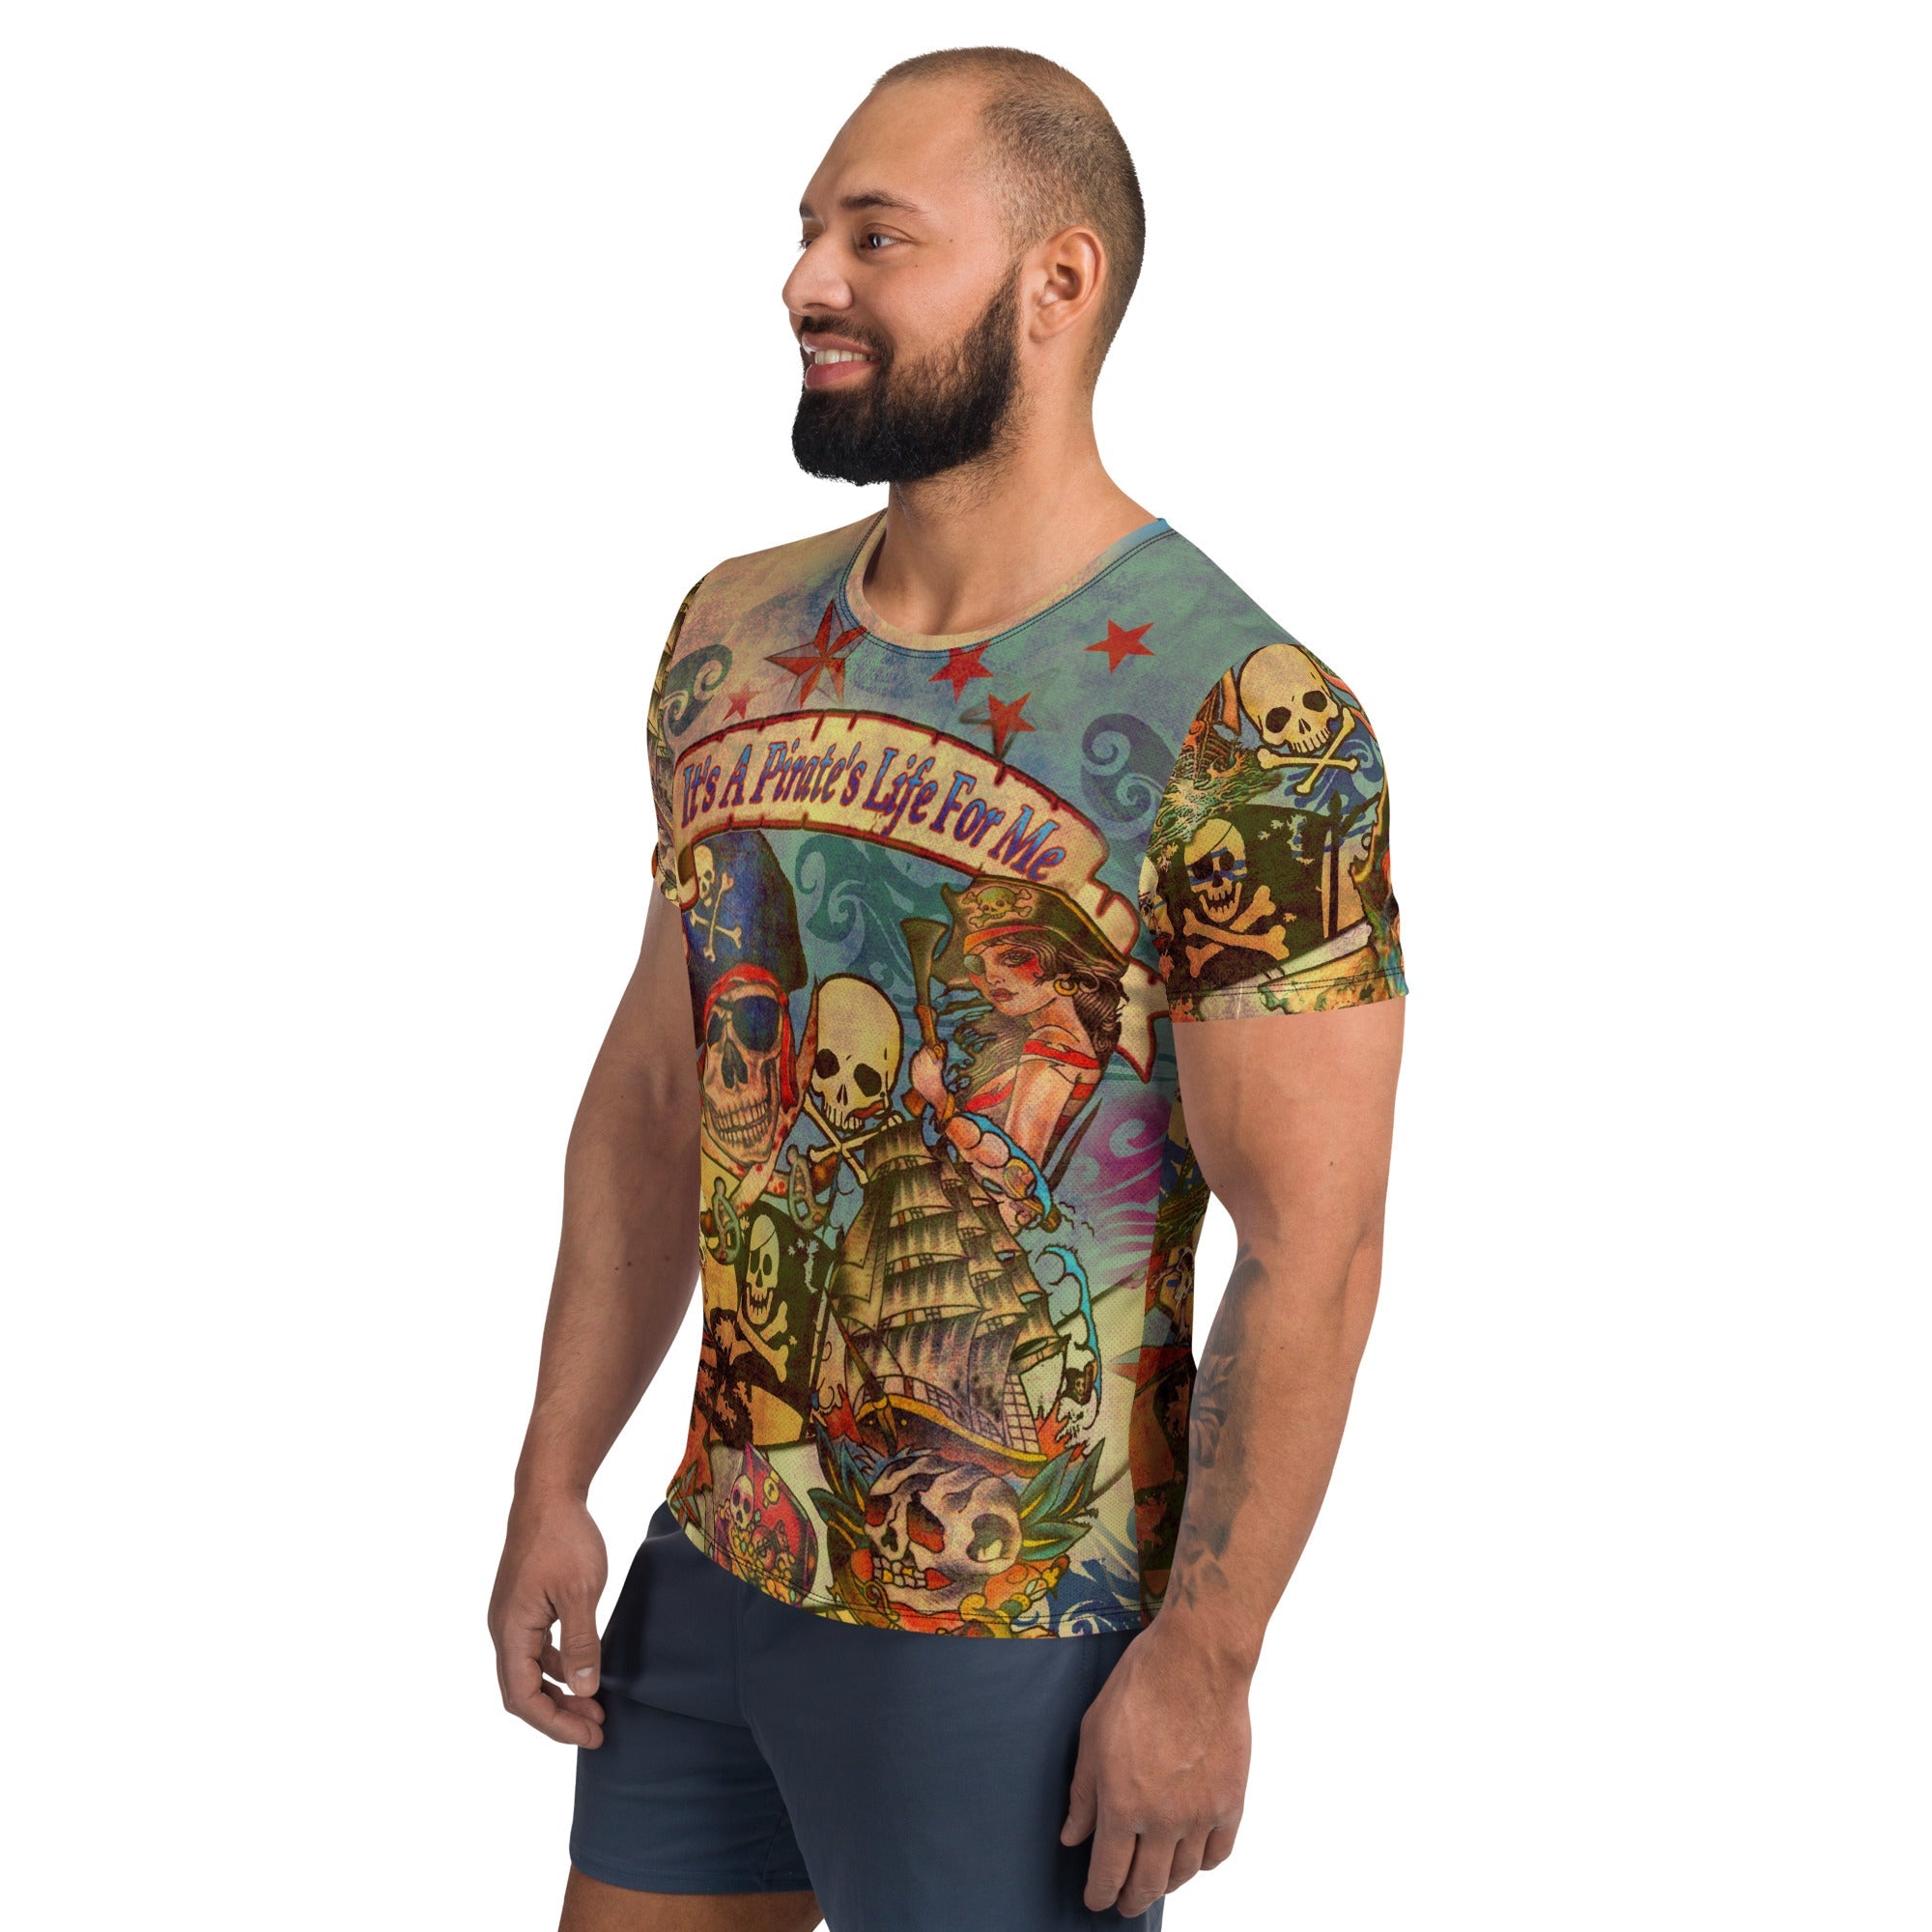 "THE PIRATE TATTOO MUSCLE TEE" for men